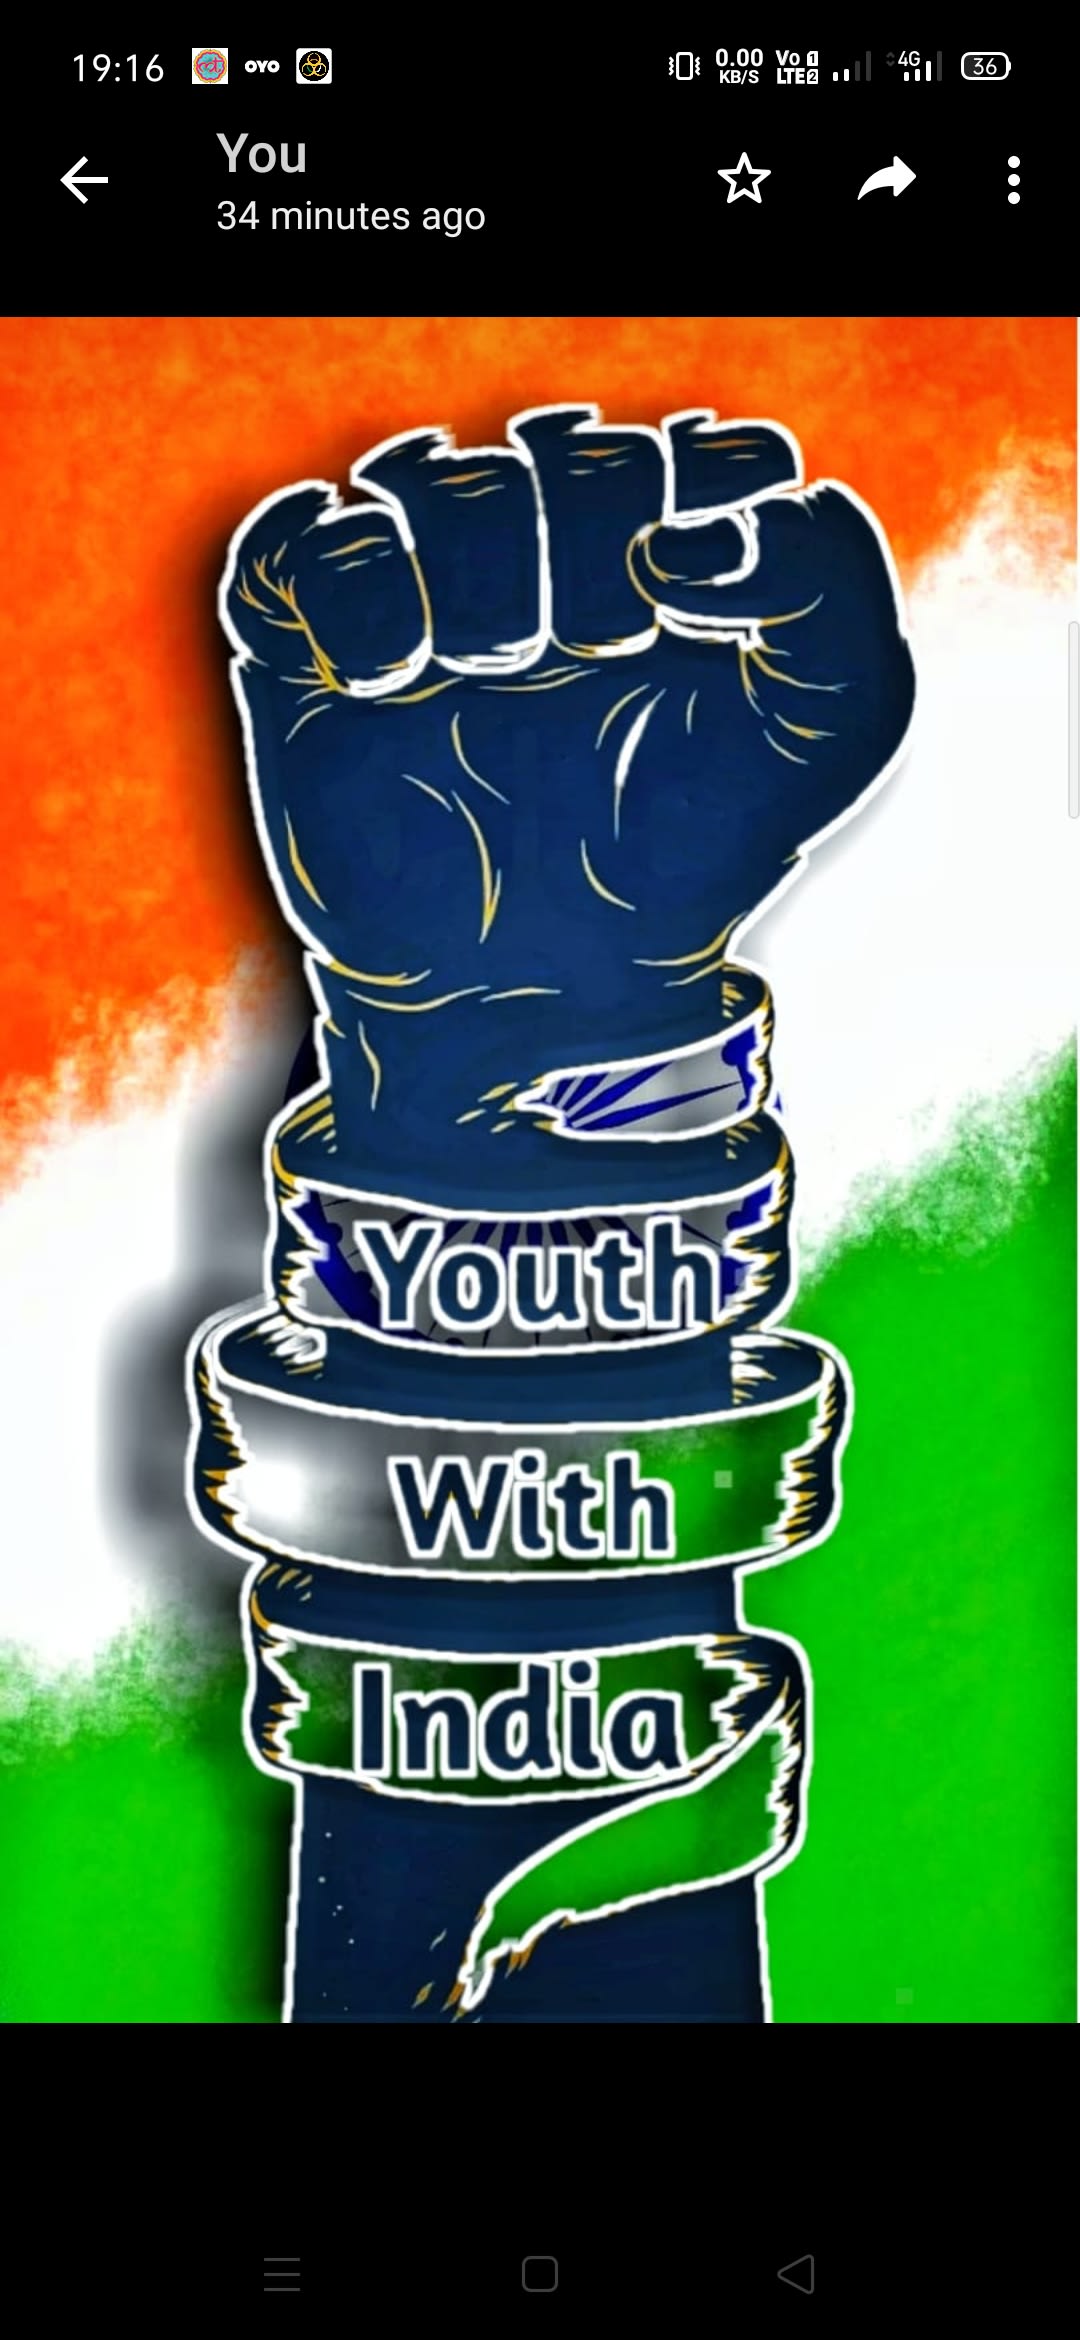 Youth With India